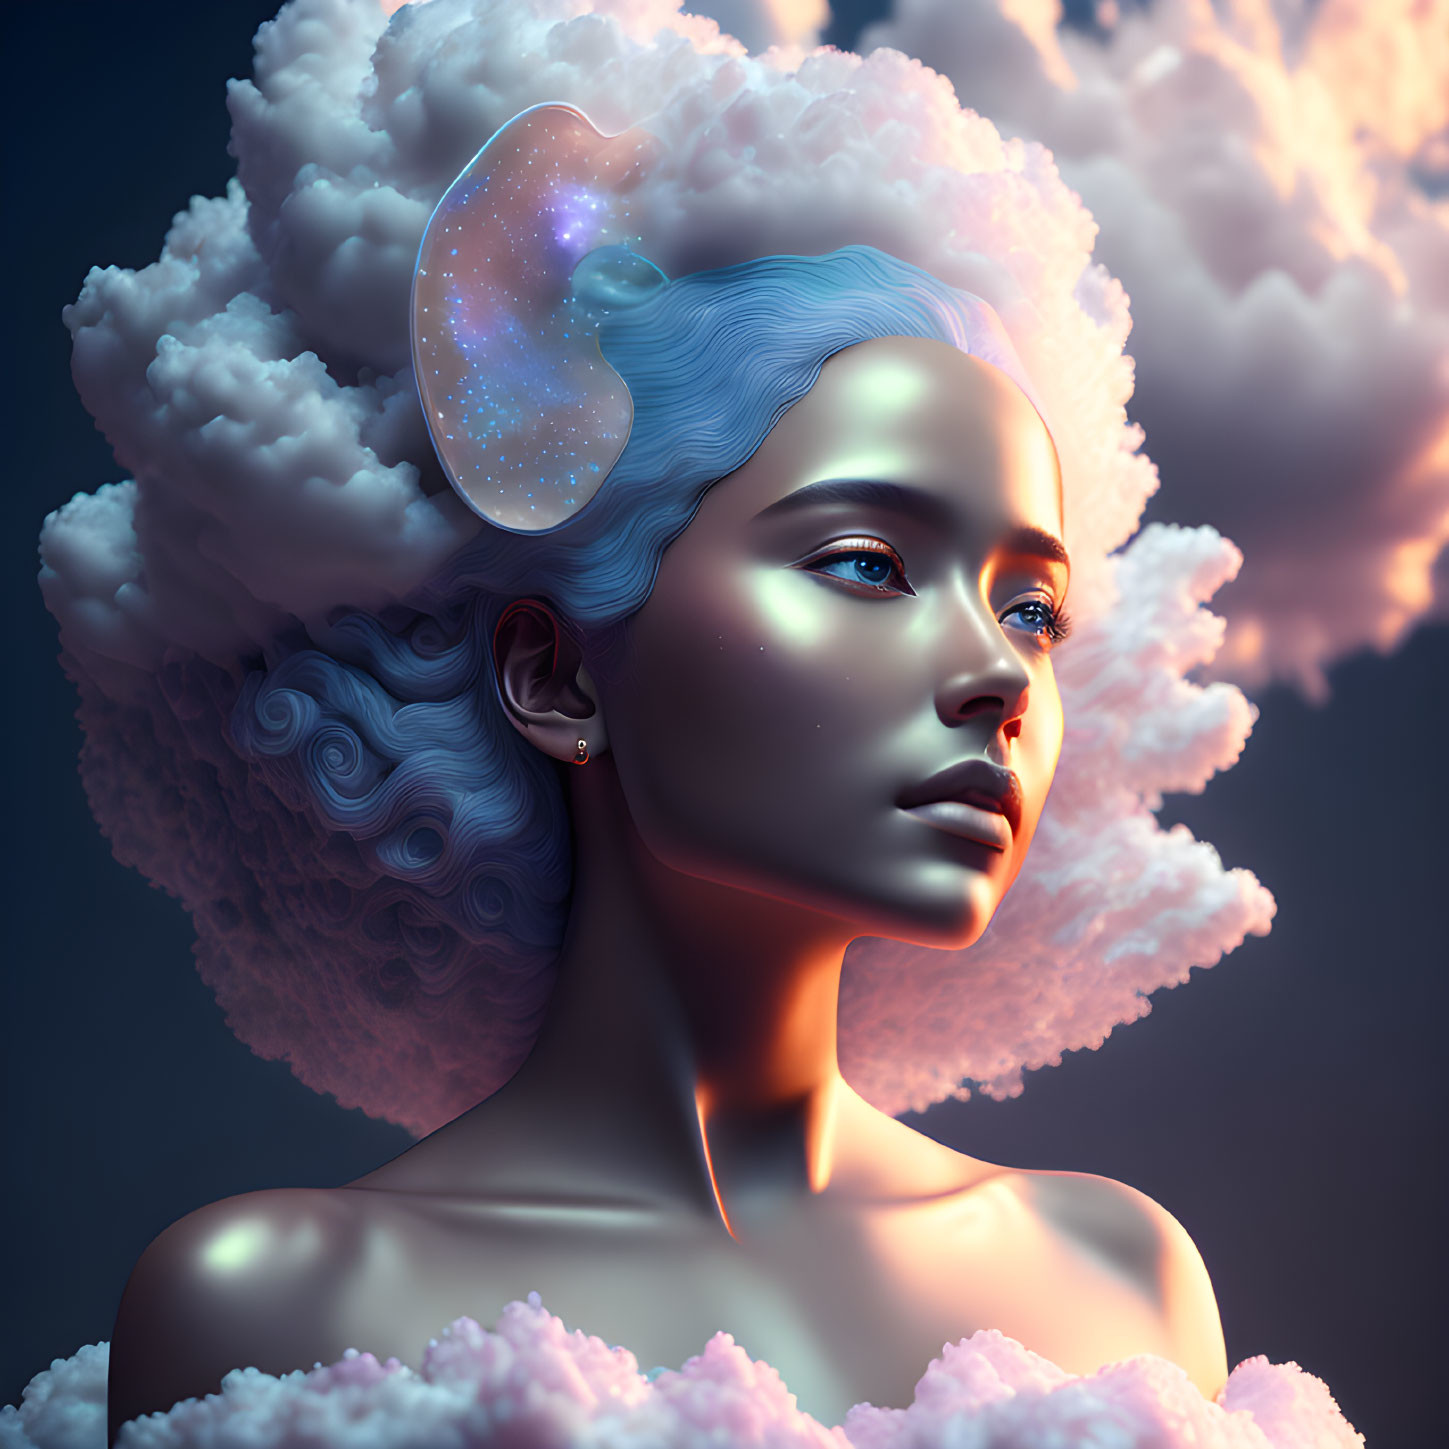 Blue-skinned woman with cosmic ear detail in pink clouds on dark background